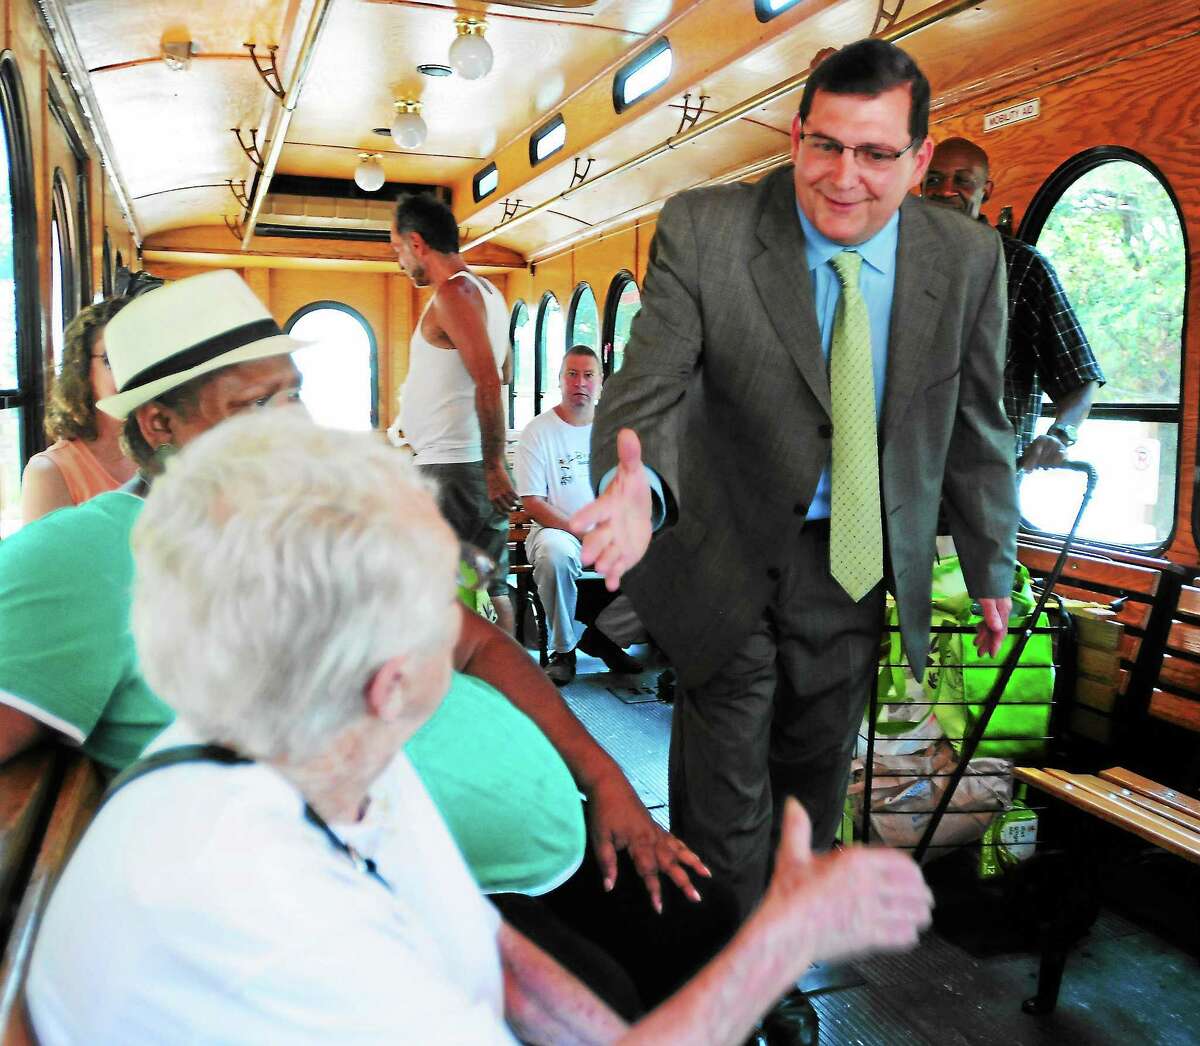 (Photo by Peter Hvizdak — Register)Edward O'Brien, who may have defeated four-term Mayor John M. Picard with a 12-vote lead in Tuesday's Democratic primary, shake hands with Lilly Rechbart, left, and Theresa Andrews, second from left, while on the Trolley in front of the Seaside apartment building on Oak Street in West Haven Wednesday, September 11, 2013